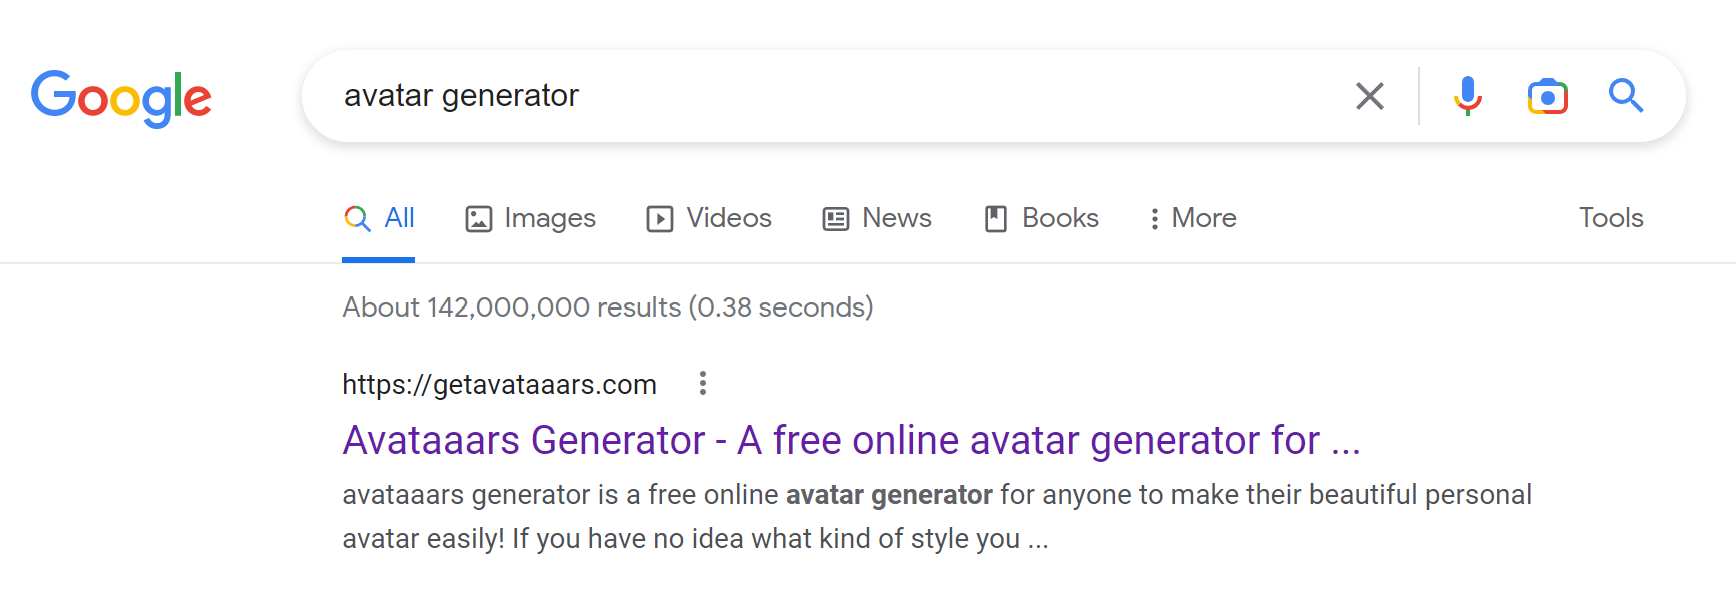 Search result of avatar generator from Google